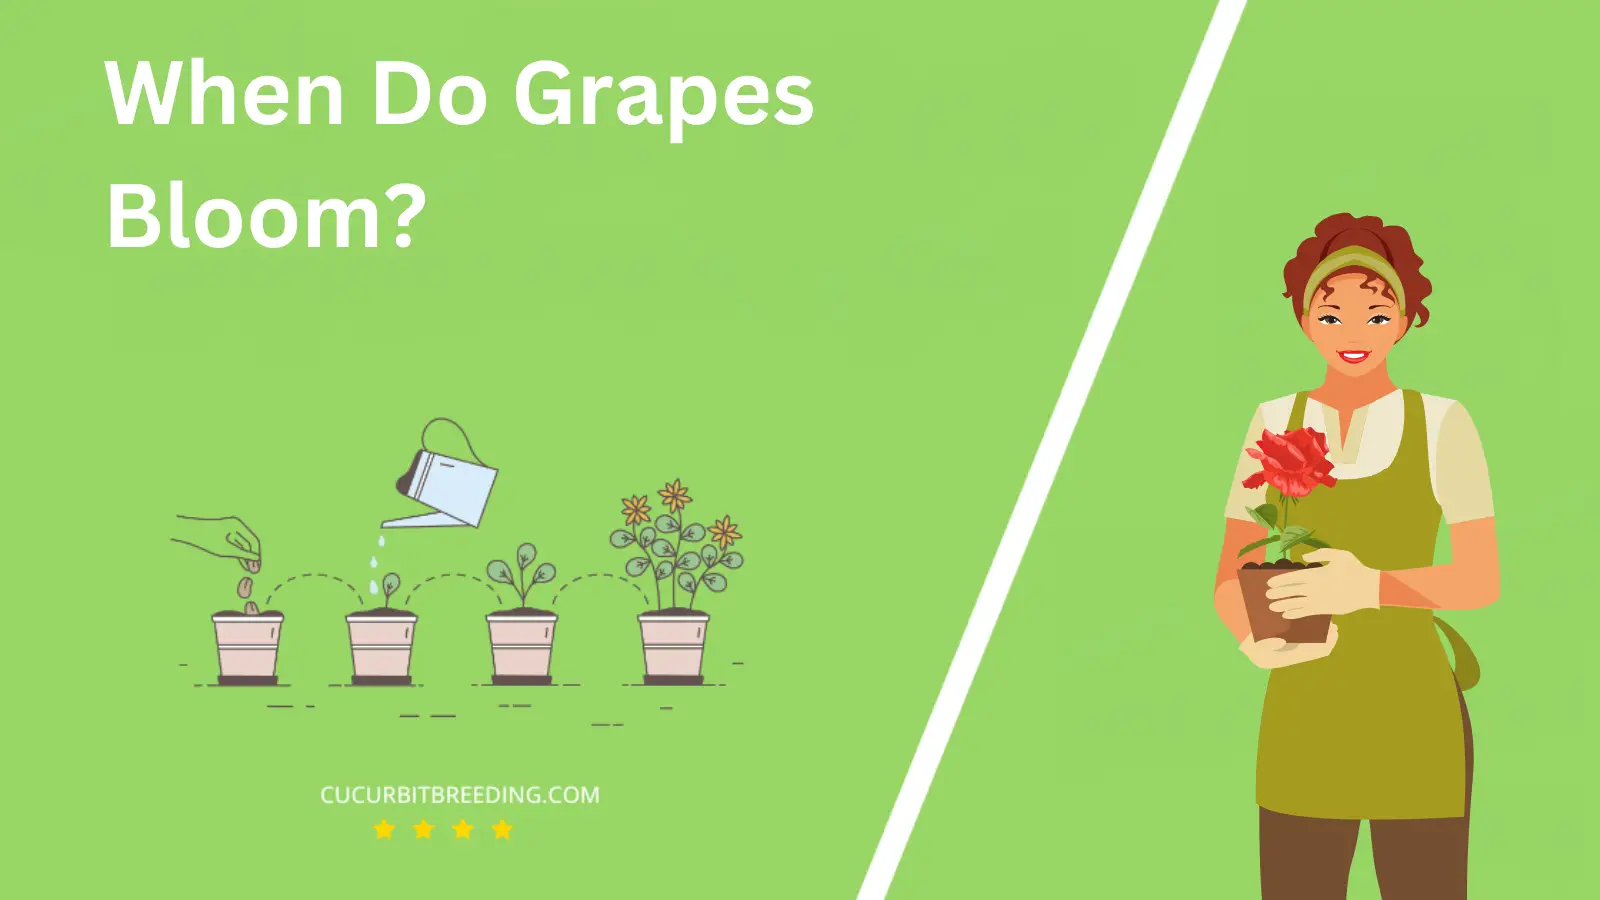 When Do Grapes Bloom?